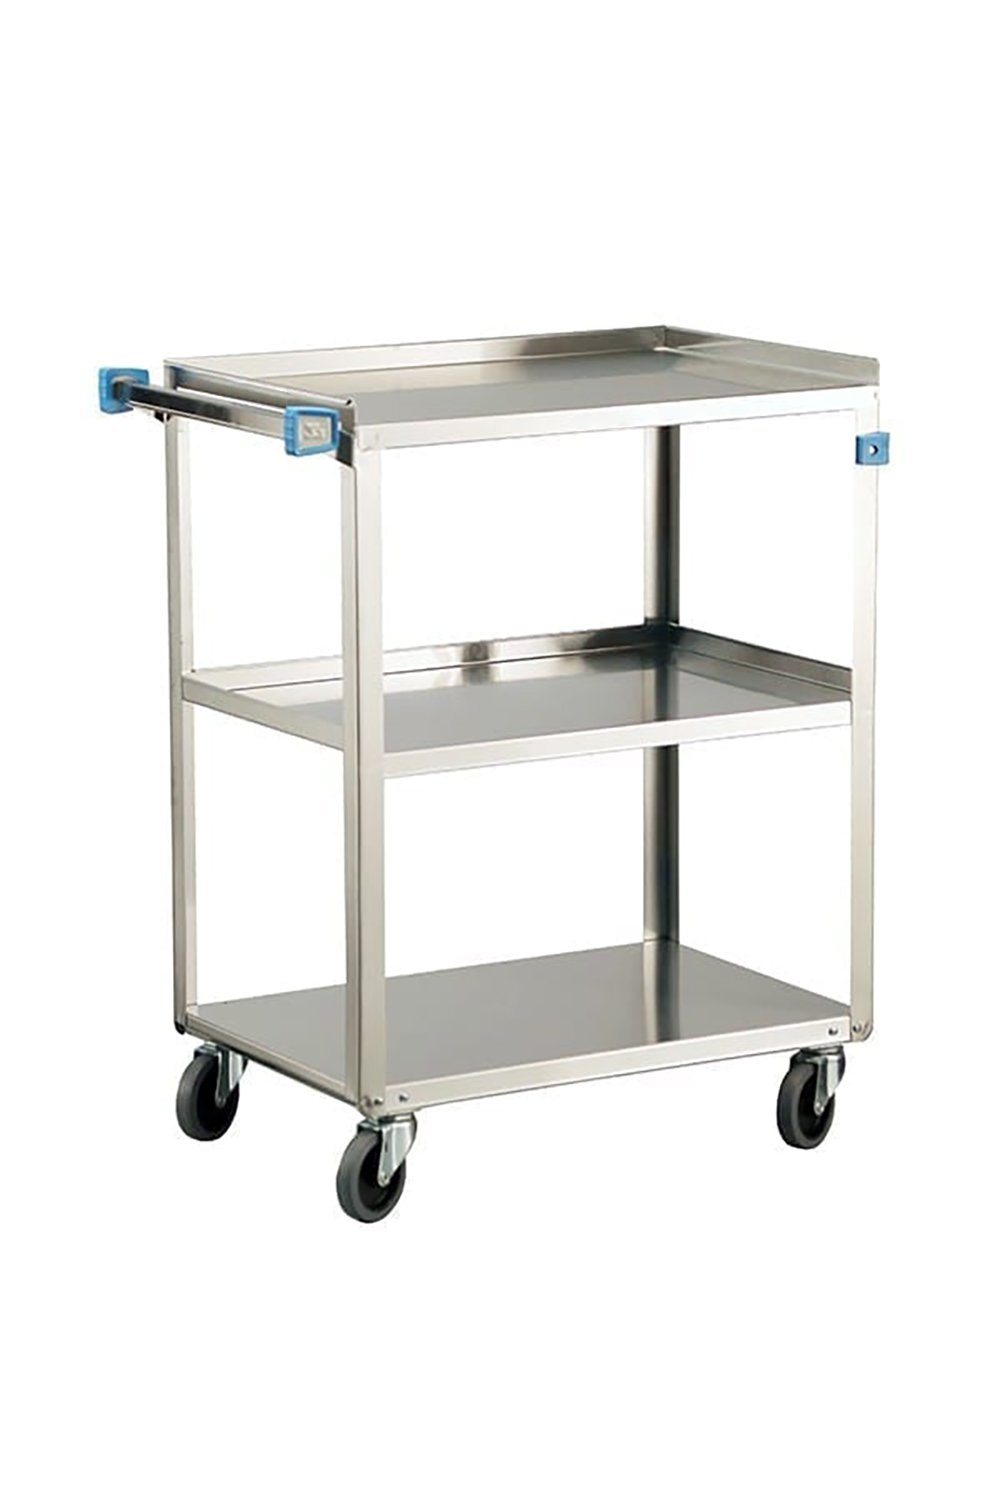 Stainless Steel Utility Cart Transport & Utility Carts Acart 18 3/8"D x 30 3/4"W x 33"H 3.0 300 lbs